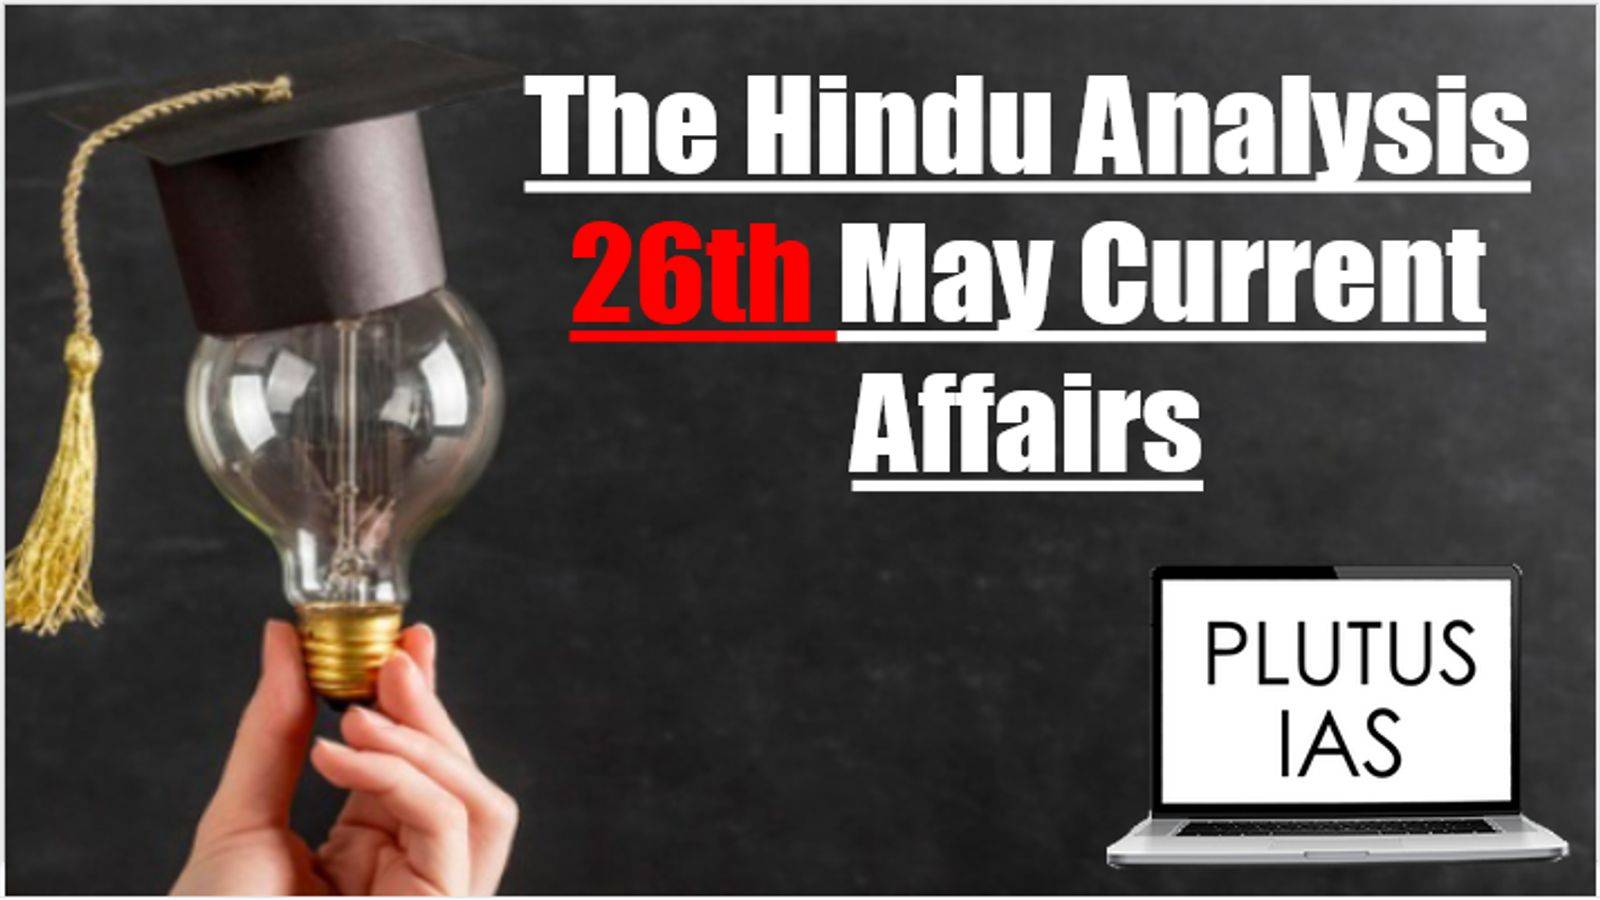 Today Current Affairs 26th May